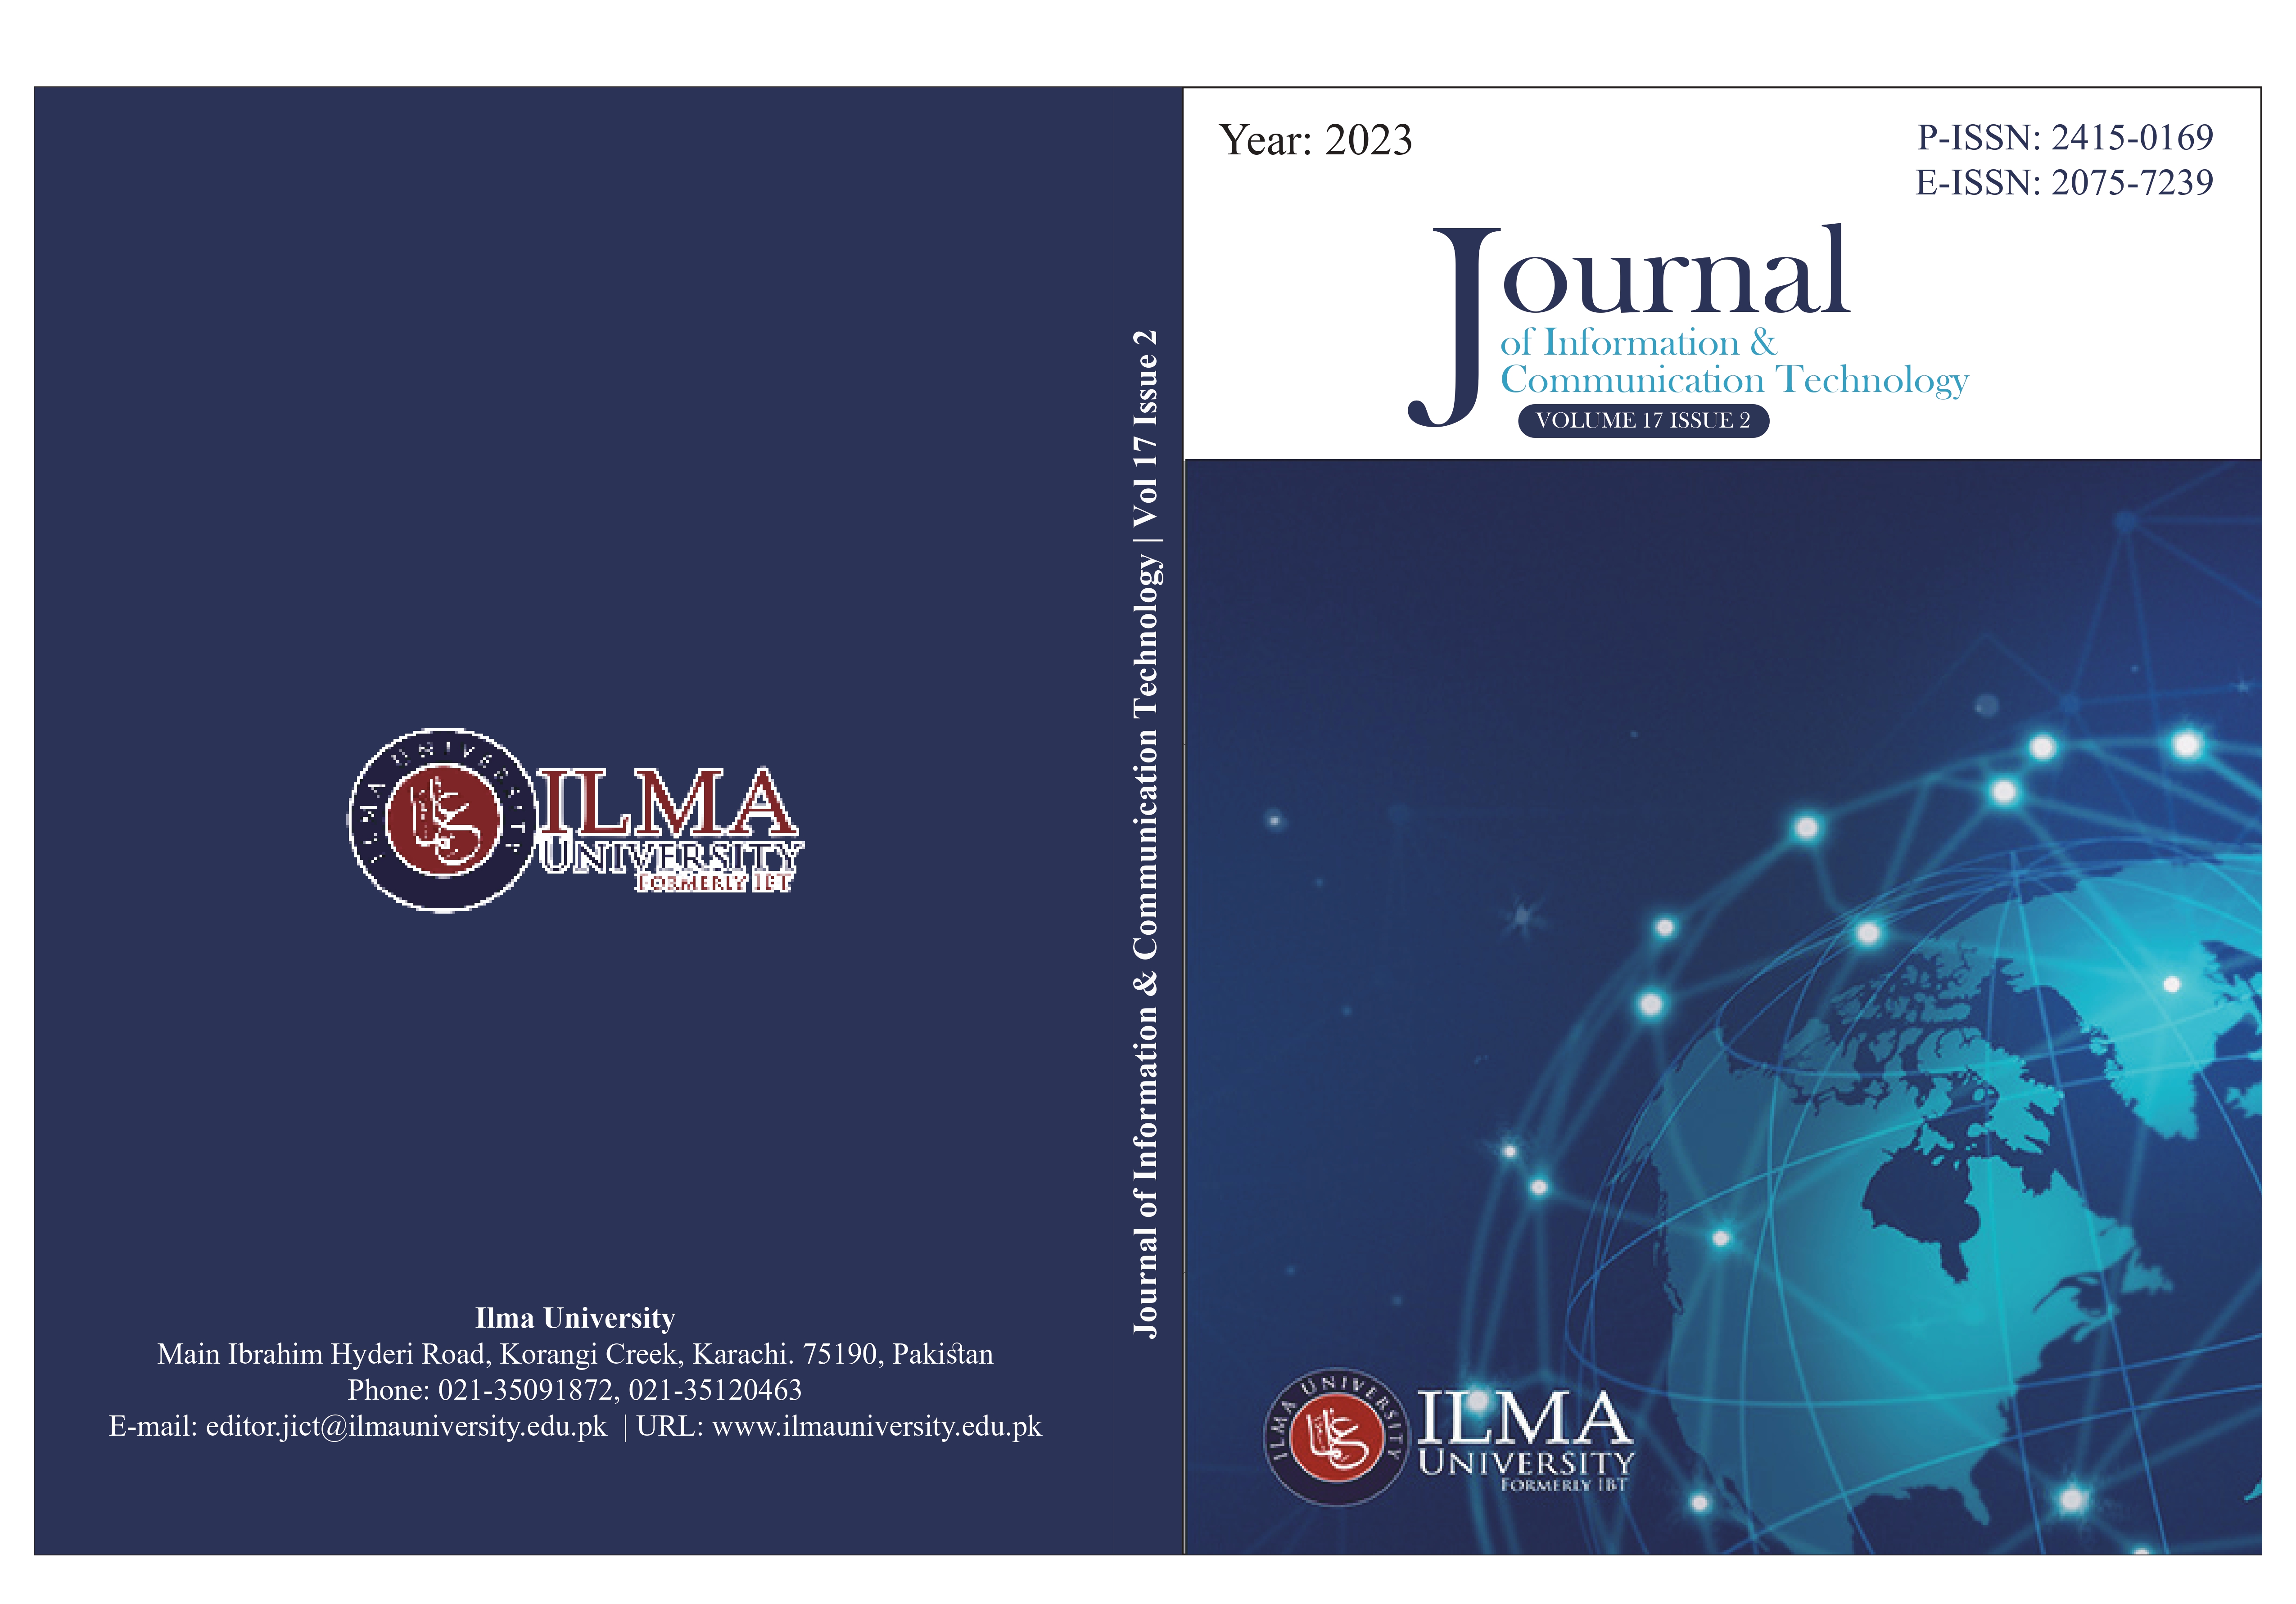 					View Vol. 17 No. 2 (2023): JOURNAL OF INFORMATION & COMMUNICATION TECHNOLOGY
				